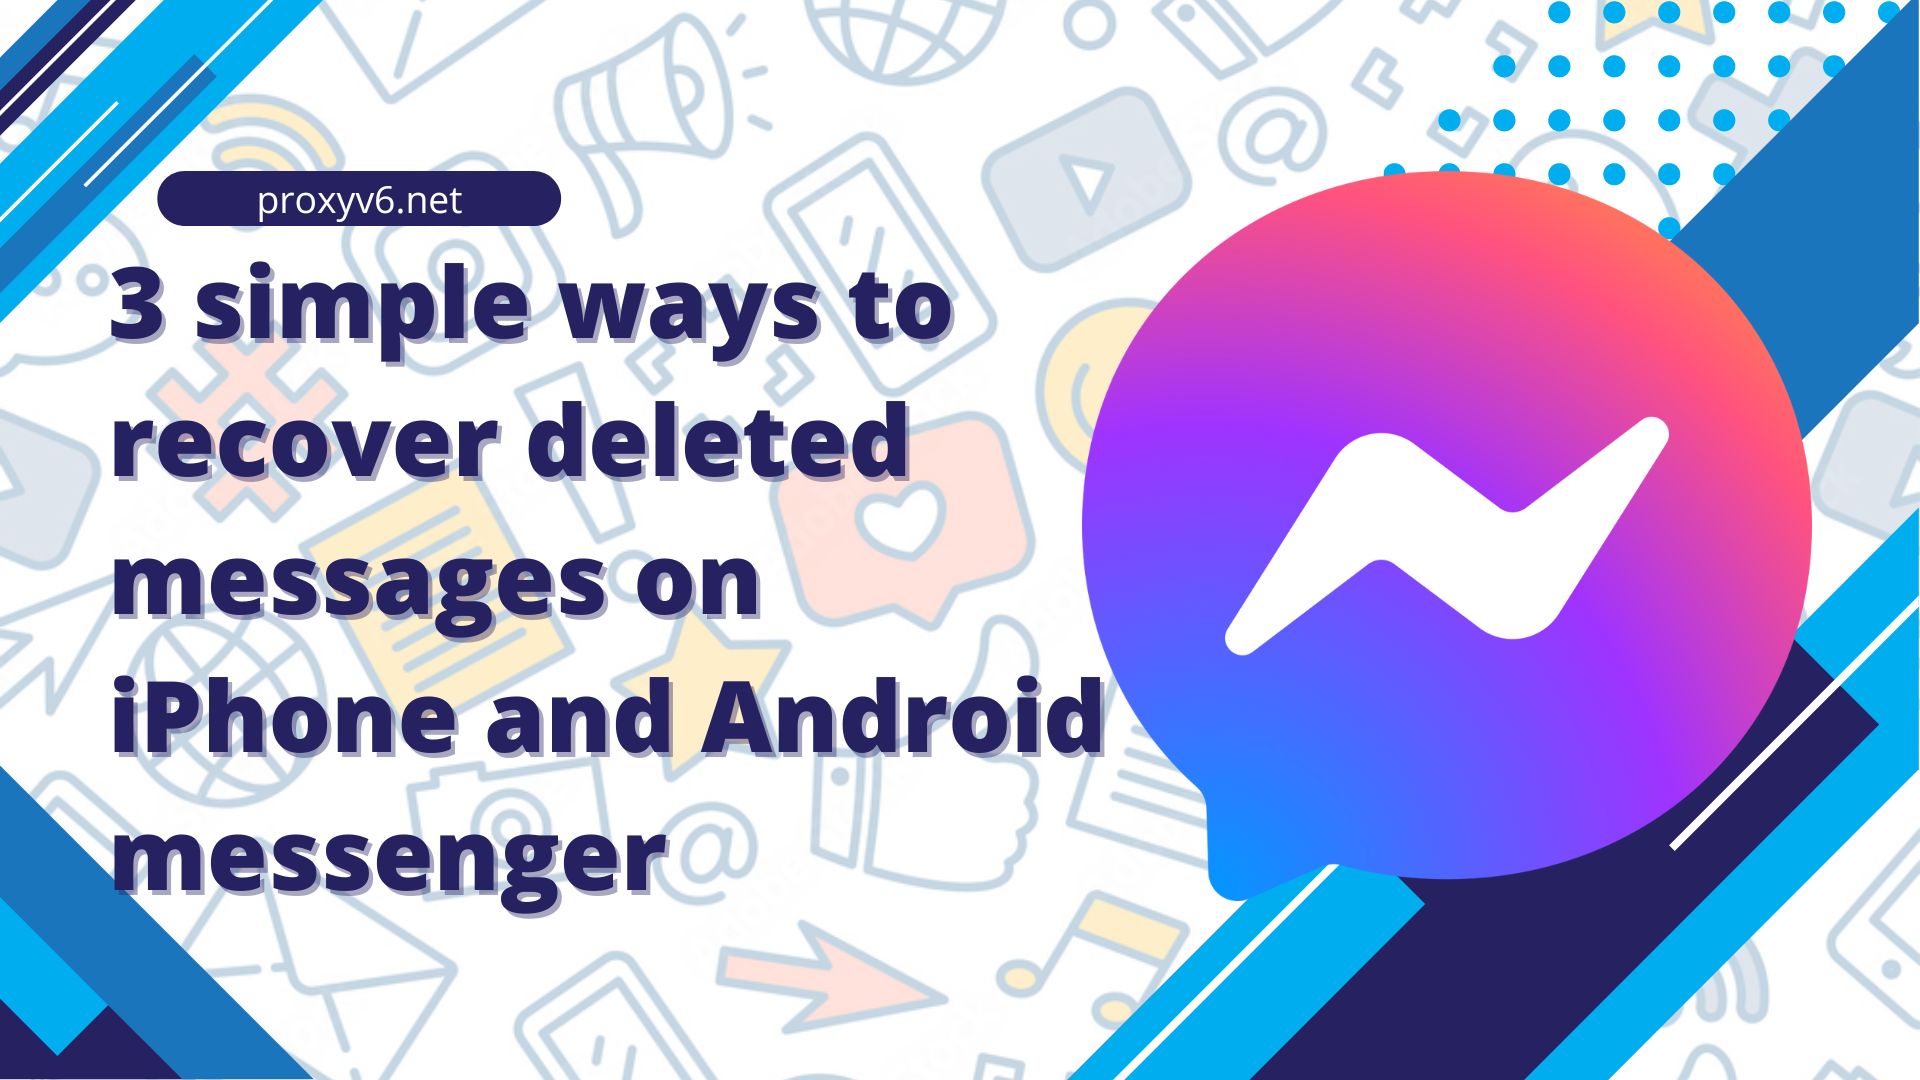 3 simple ways to recover deleted messages on iPhone and Android messenger